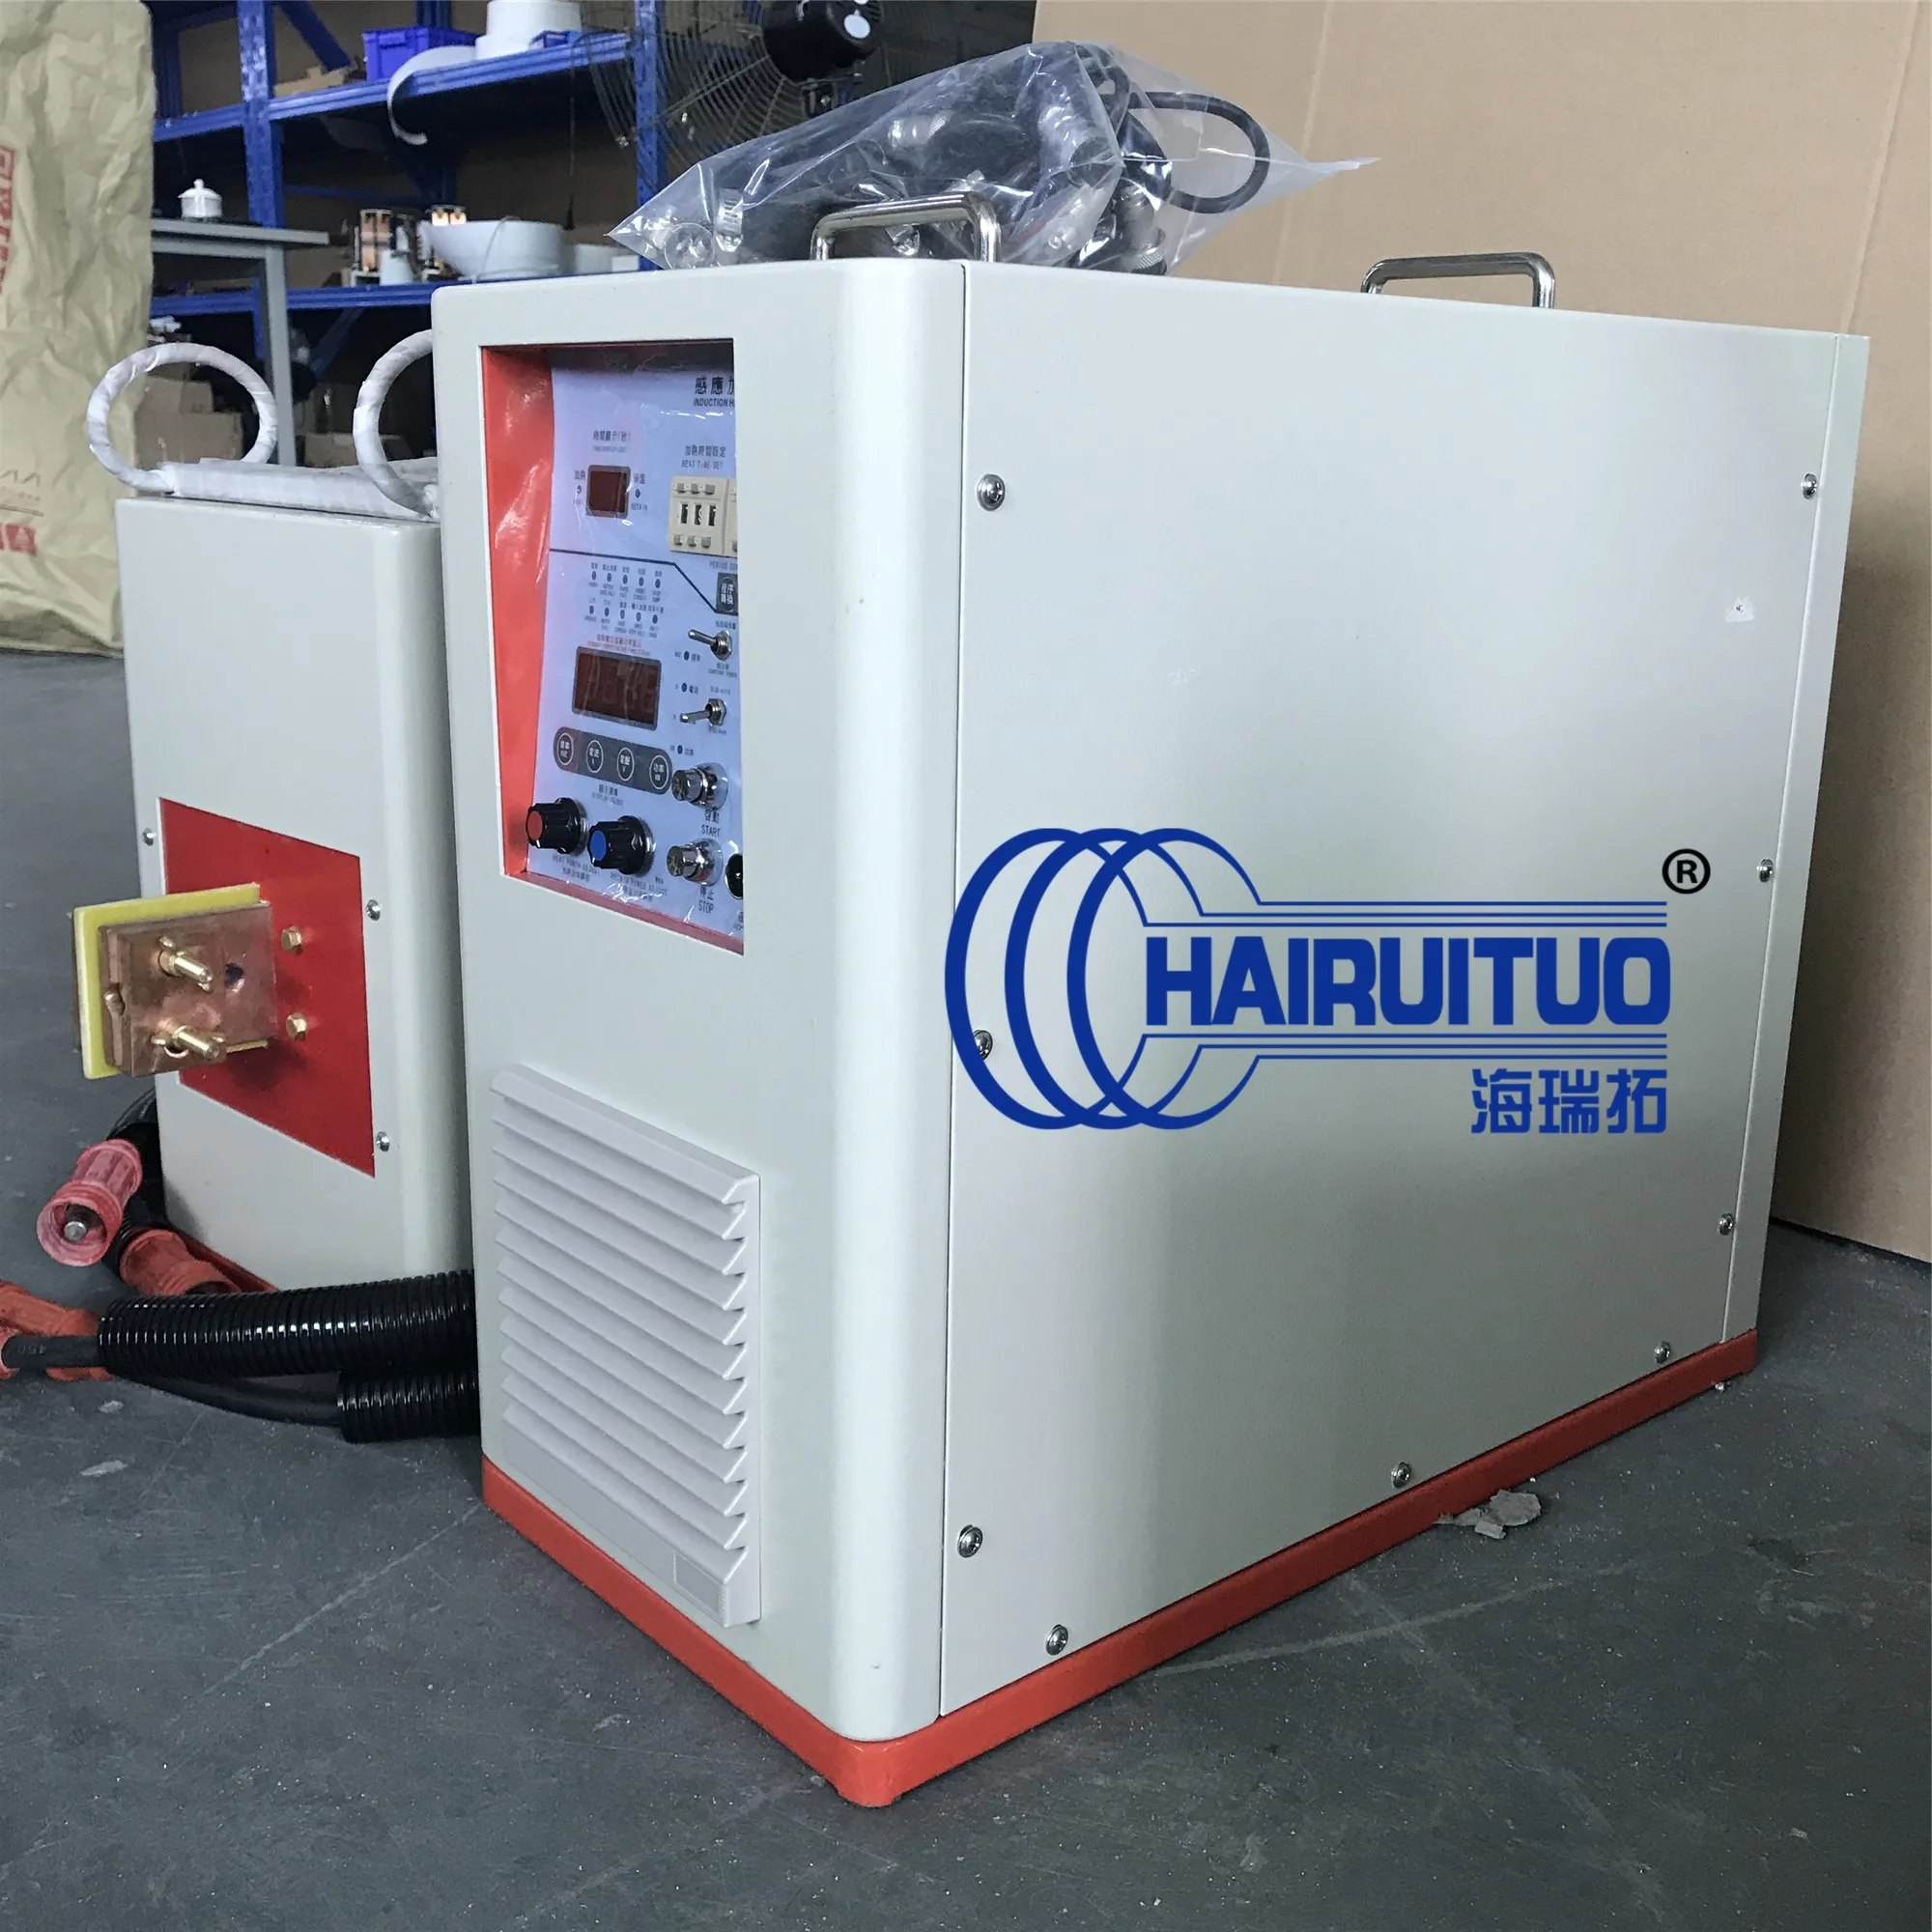 20KW induction heating machine for welding and quenching Ultrahigh frequency induction heater machine